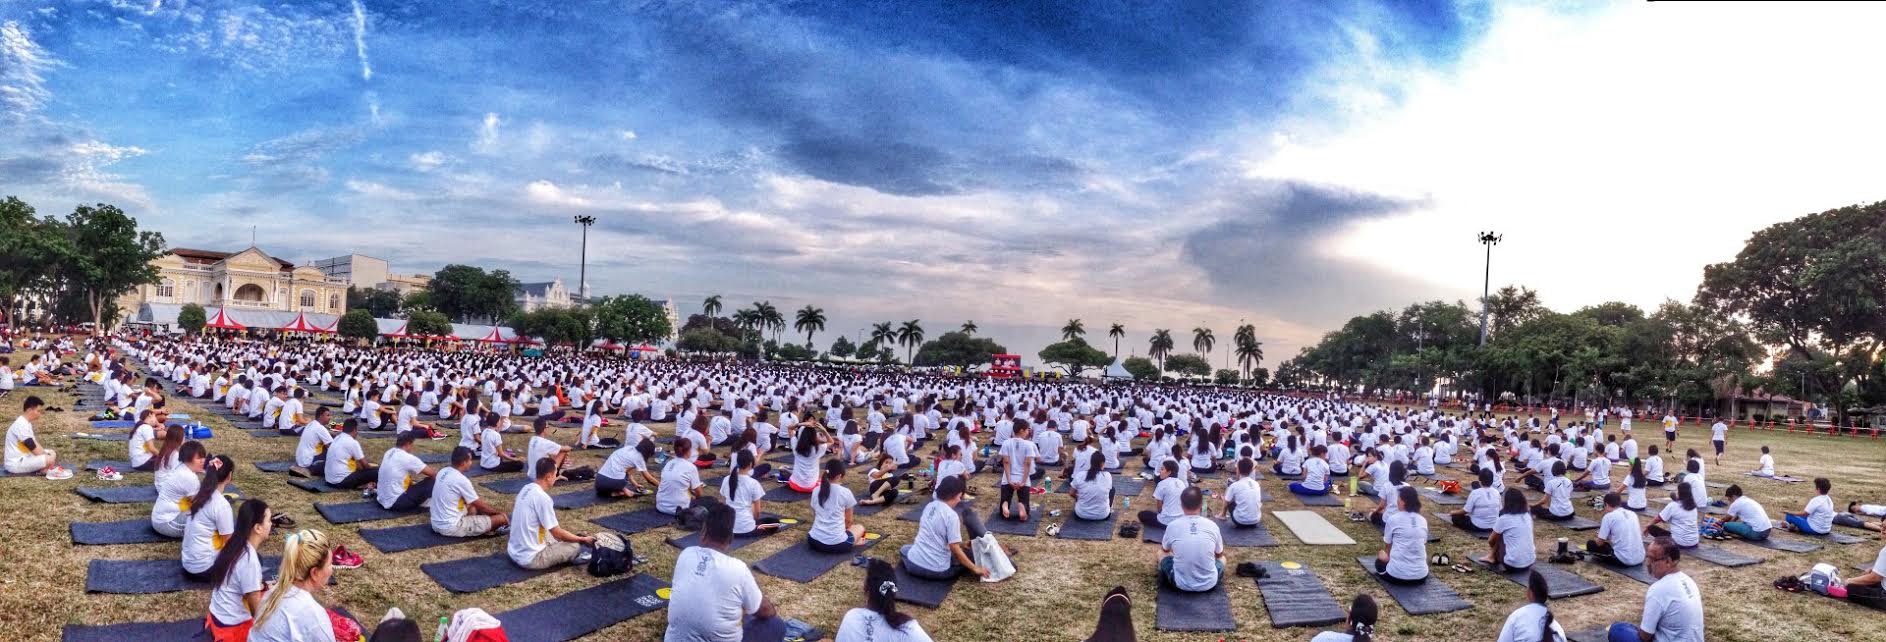 1.25 crore to participate in Yoga Day events across Gujarat, world record to be attempted